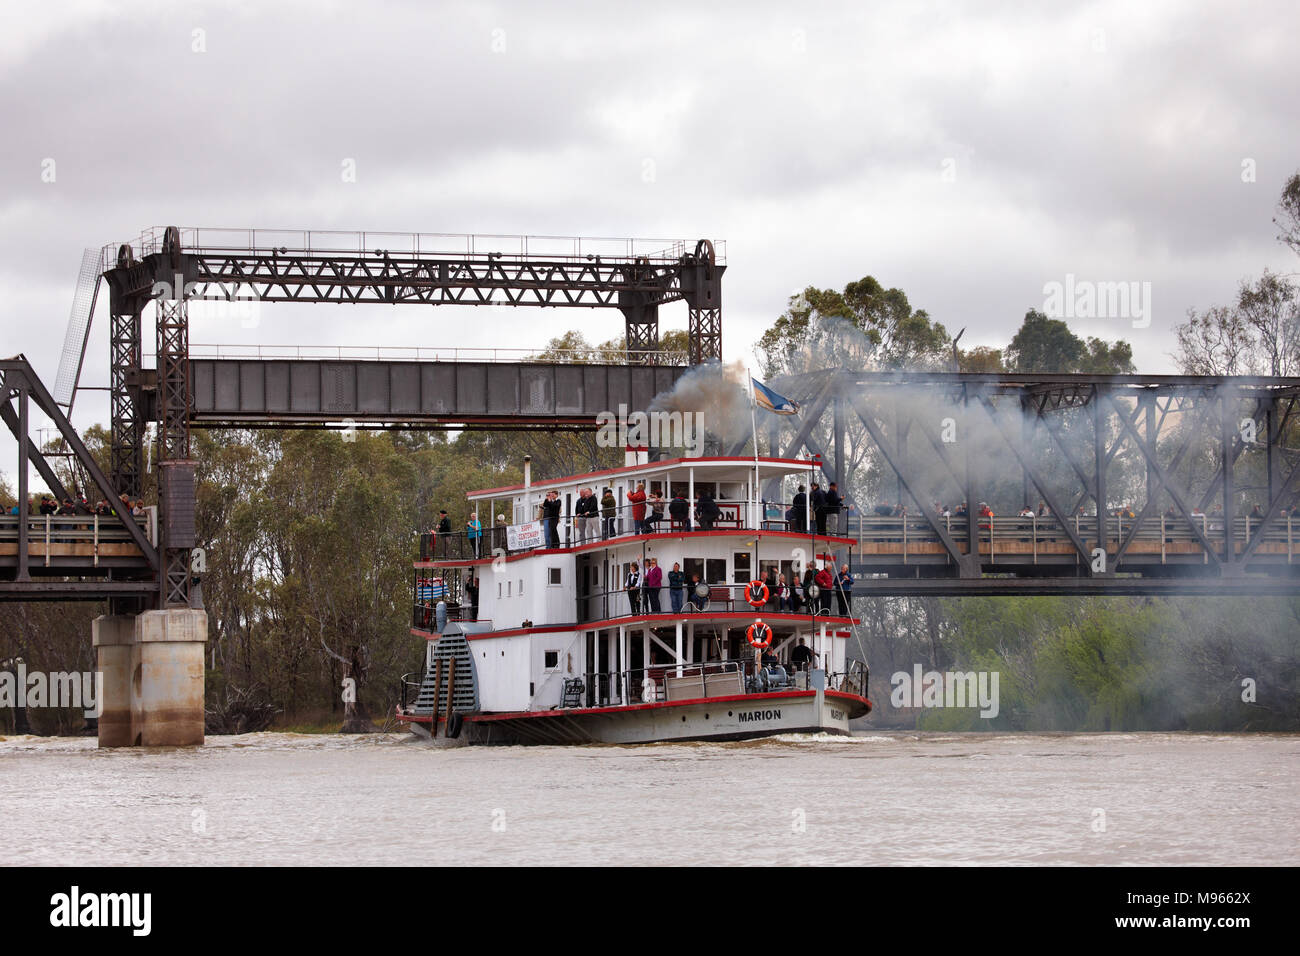 PS Marion on the Murray River near the Abbotsford Bridge at Curlwaa. The Paddle Steamer was on her way upstream to Mildura. Stock Photo